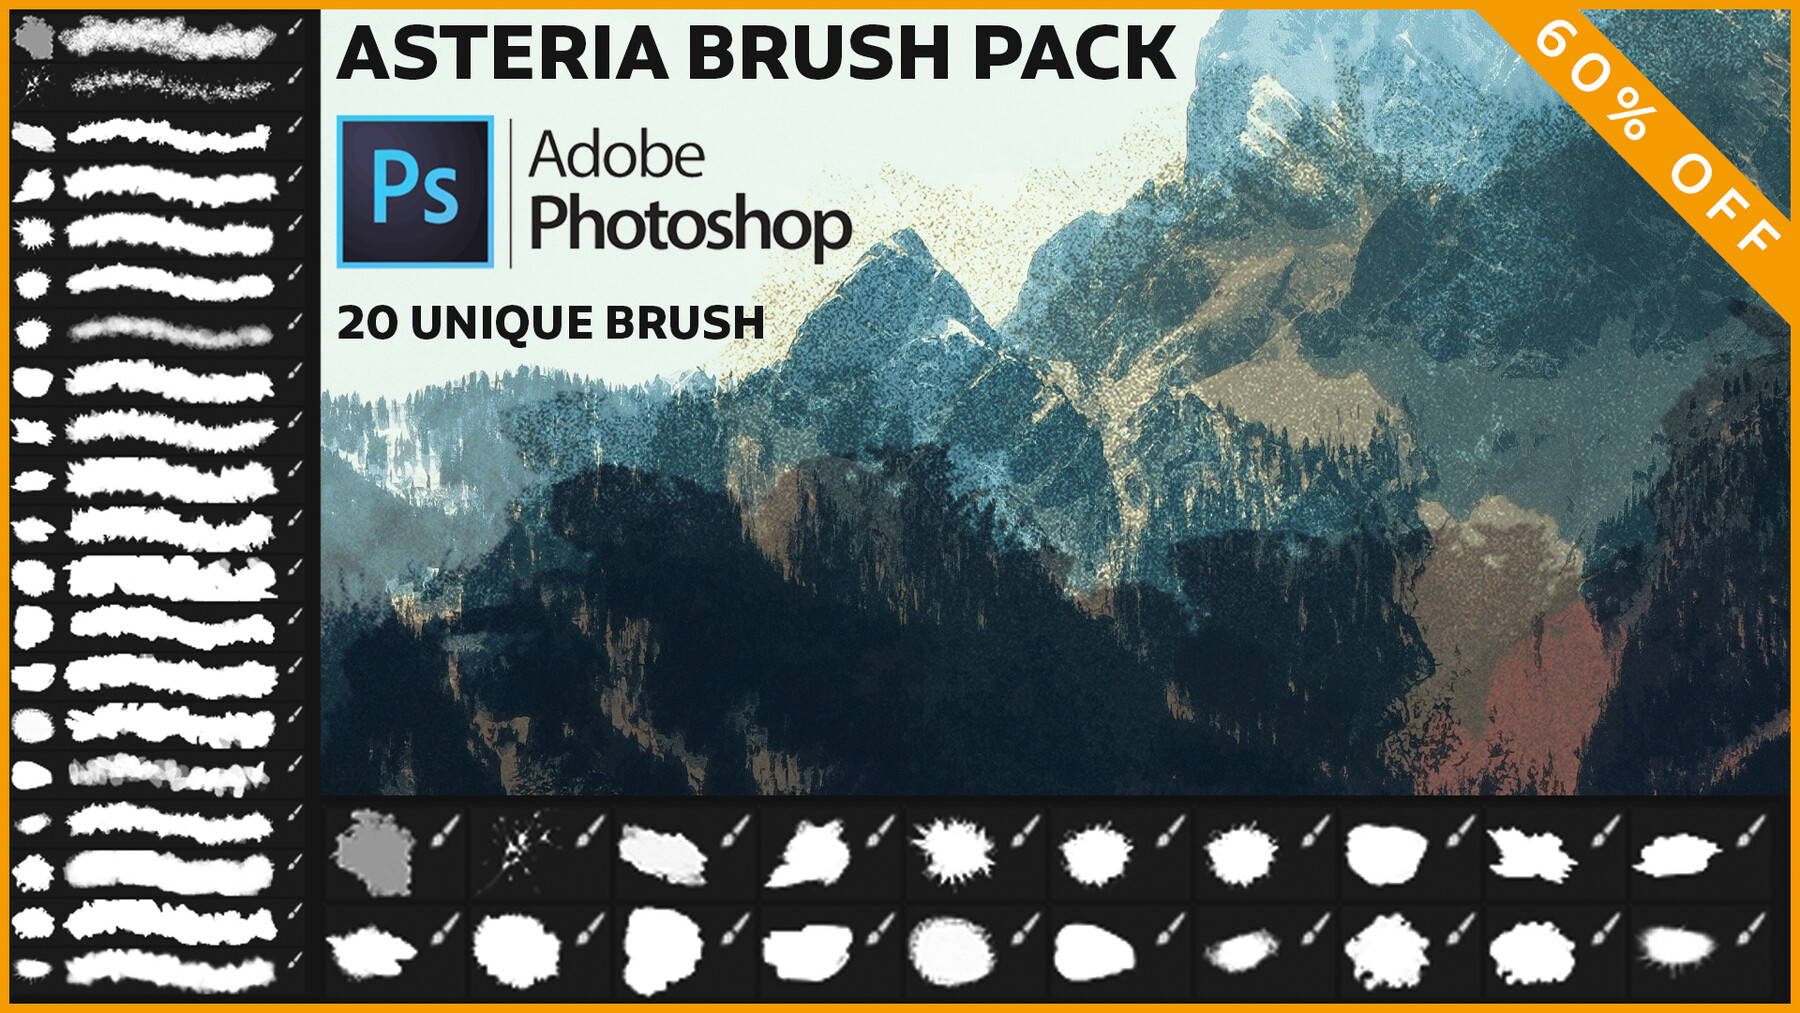 abr brushes for photoshop cs6 free download